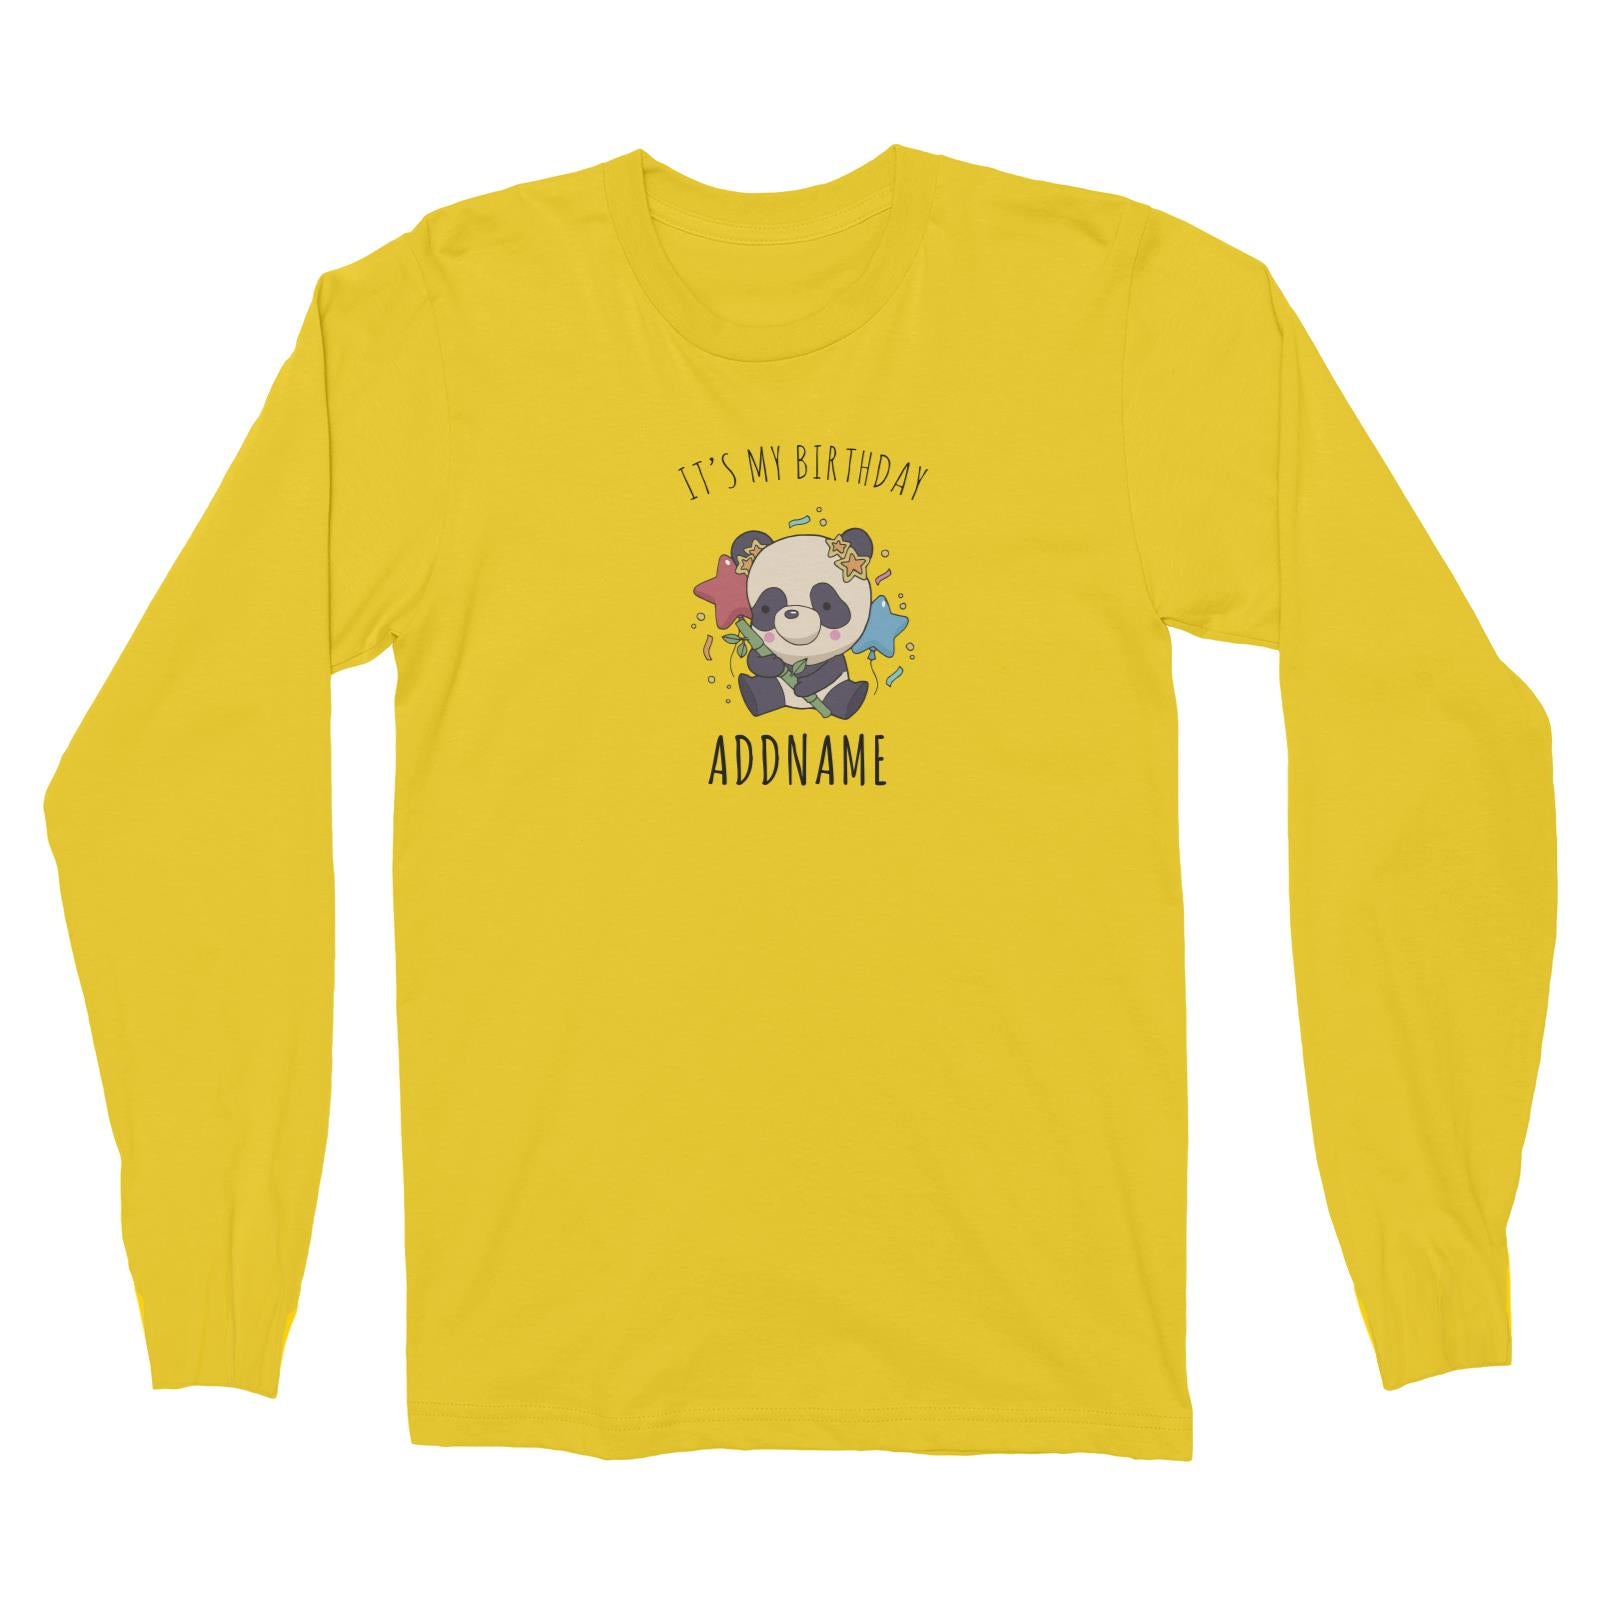 Birthday Sketch Animals Panda with Party Hat Holding Bamboo It's My Birthday Addname Long Sleeve Unisex T-Shirt